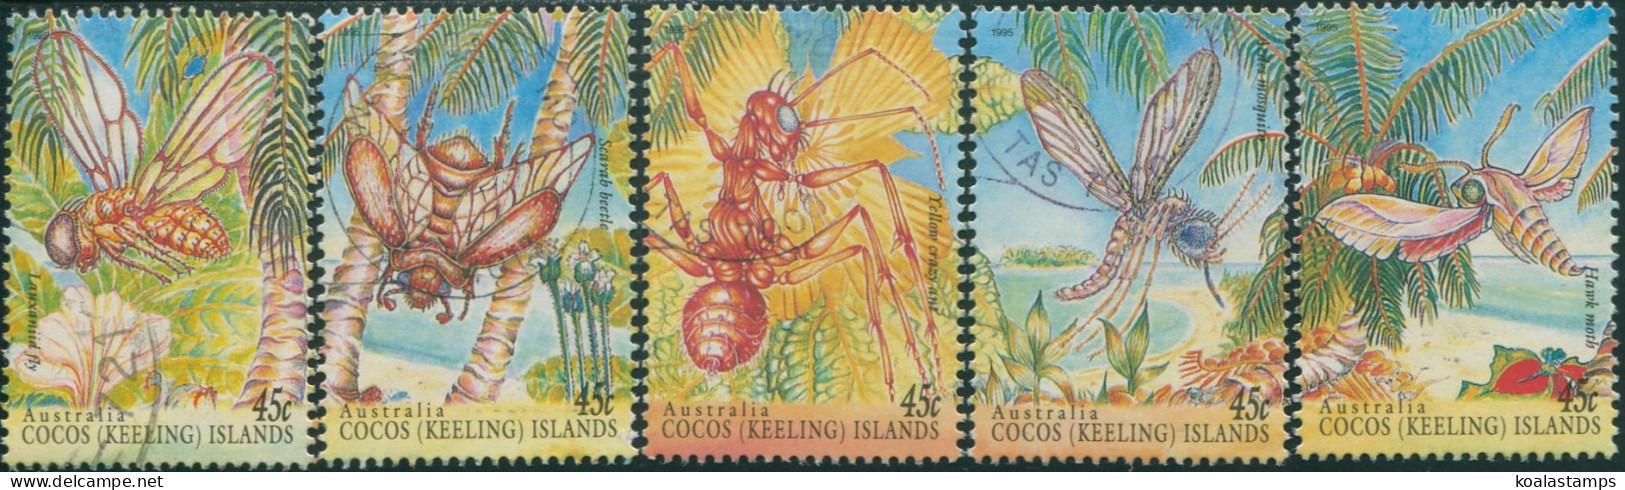 Cocos Islands 1994 SG326 Insects Part Set FU - Cocos (Keeling) Islands